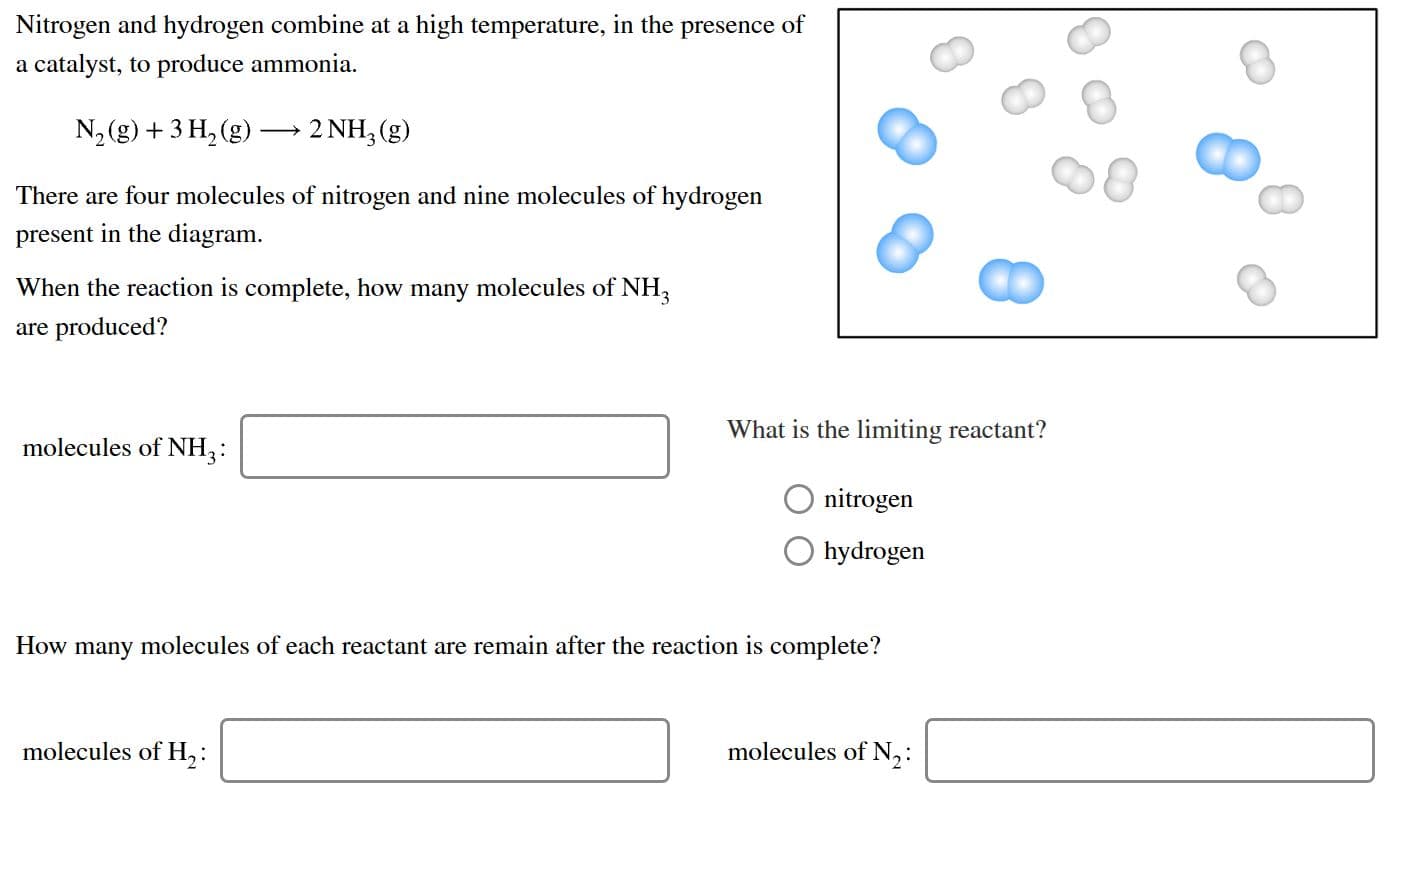 Nitrogen and hydrogen combine at a high temperature, in the presence of
a catalyst, to produce ammonia
2 NH, (g)
N2 (g)3 H2 (g)
There are four molecules of nitrogen and nine molecules of hydrogen
present in the diagram
When the reaction is complete, how many molecules of NH
are produced?
What is the limiting reactant?
molecules of NH2:
nitrogen
hydrogen
How many molecules of each reactant are remain after the reaction is complete?
molecules of N,:
molecules of H,:
